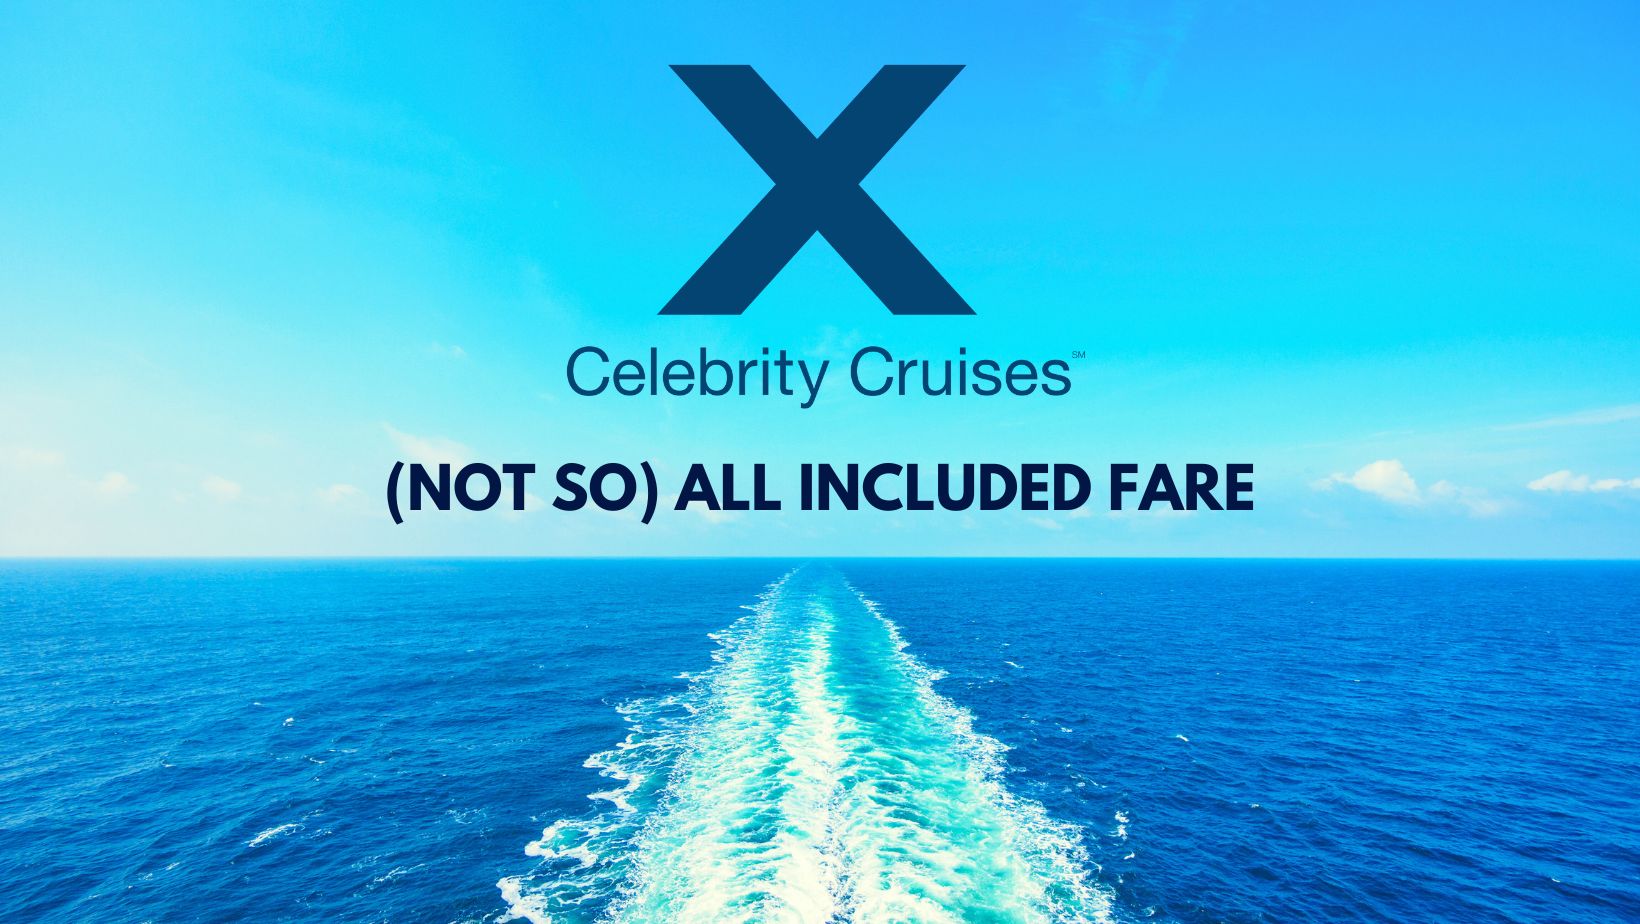 Celebrity Cruises All Included – Is It Worth It Now?